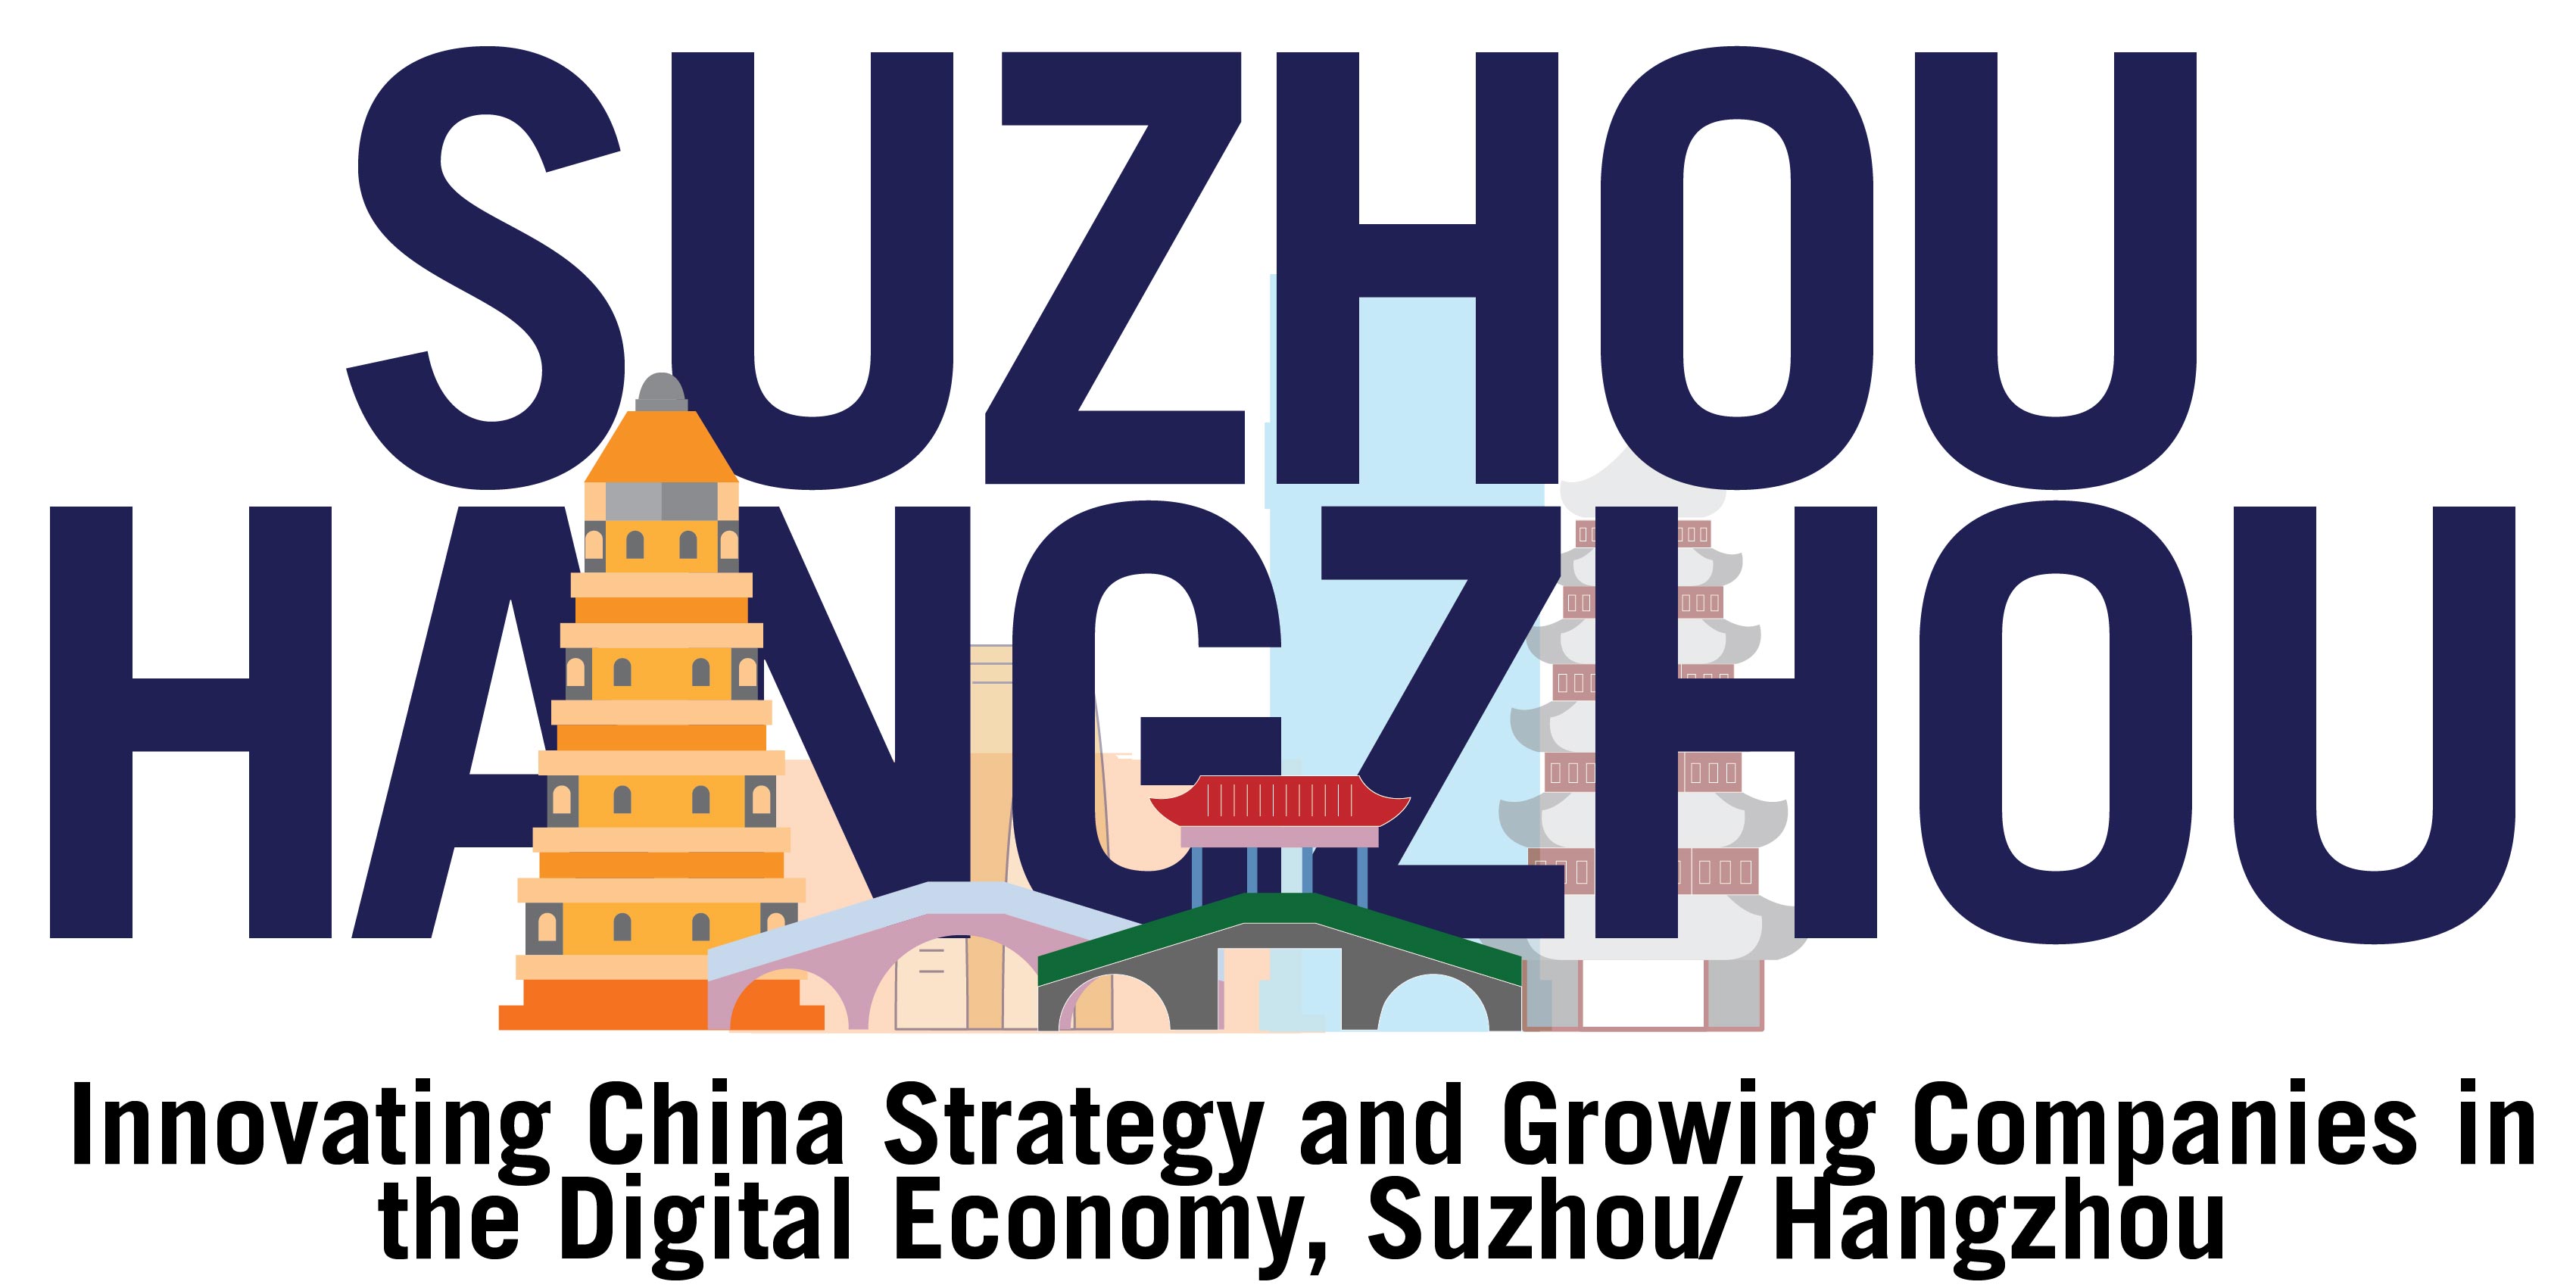 Innovating China Strategy and Growing Companies in the Digital Economy, Suzhou/ Hangzhou